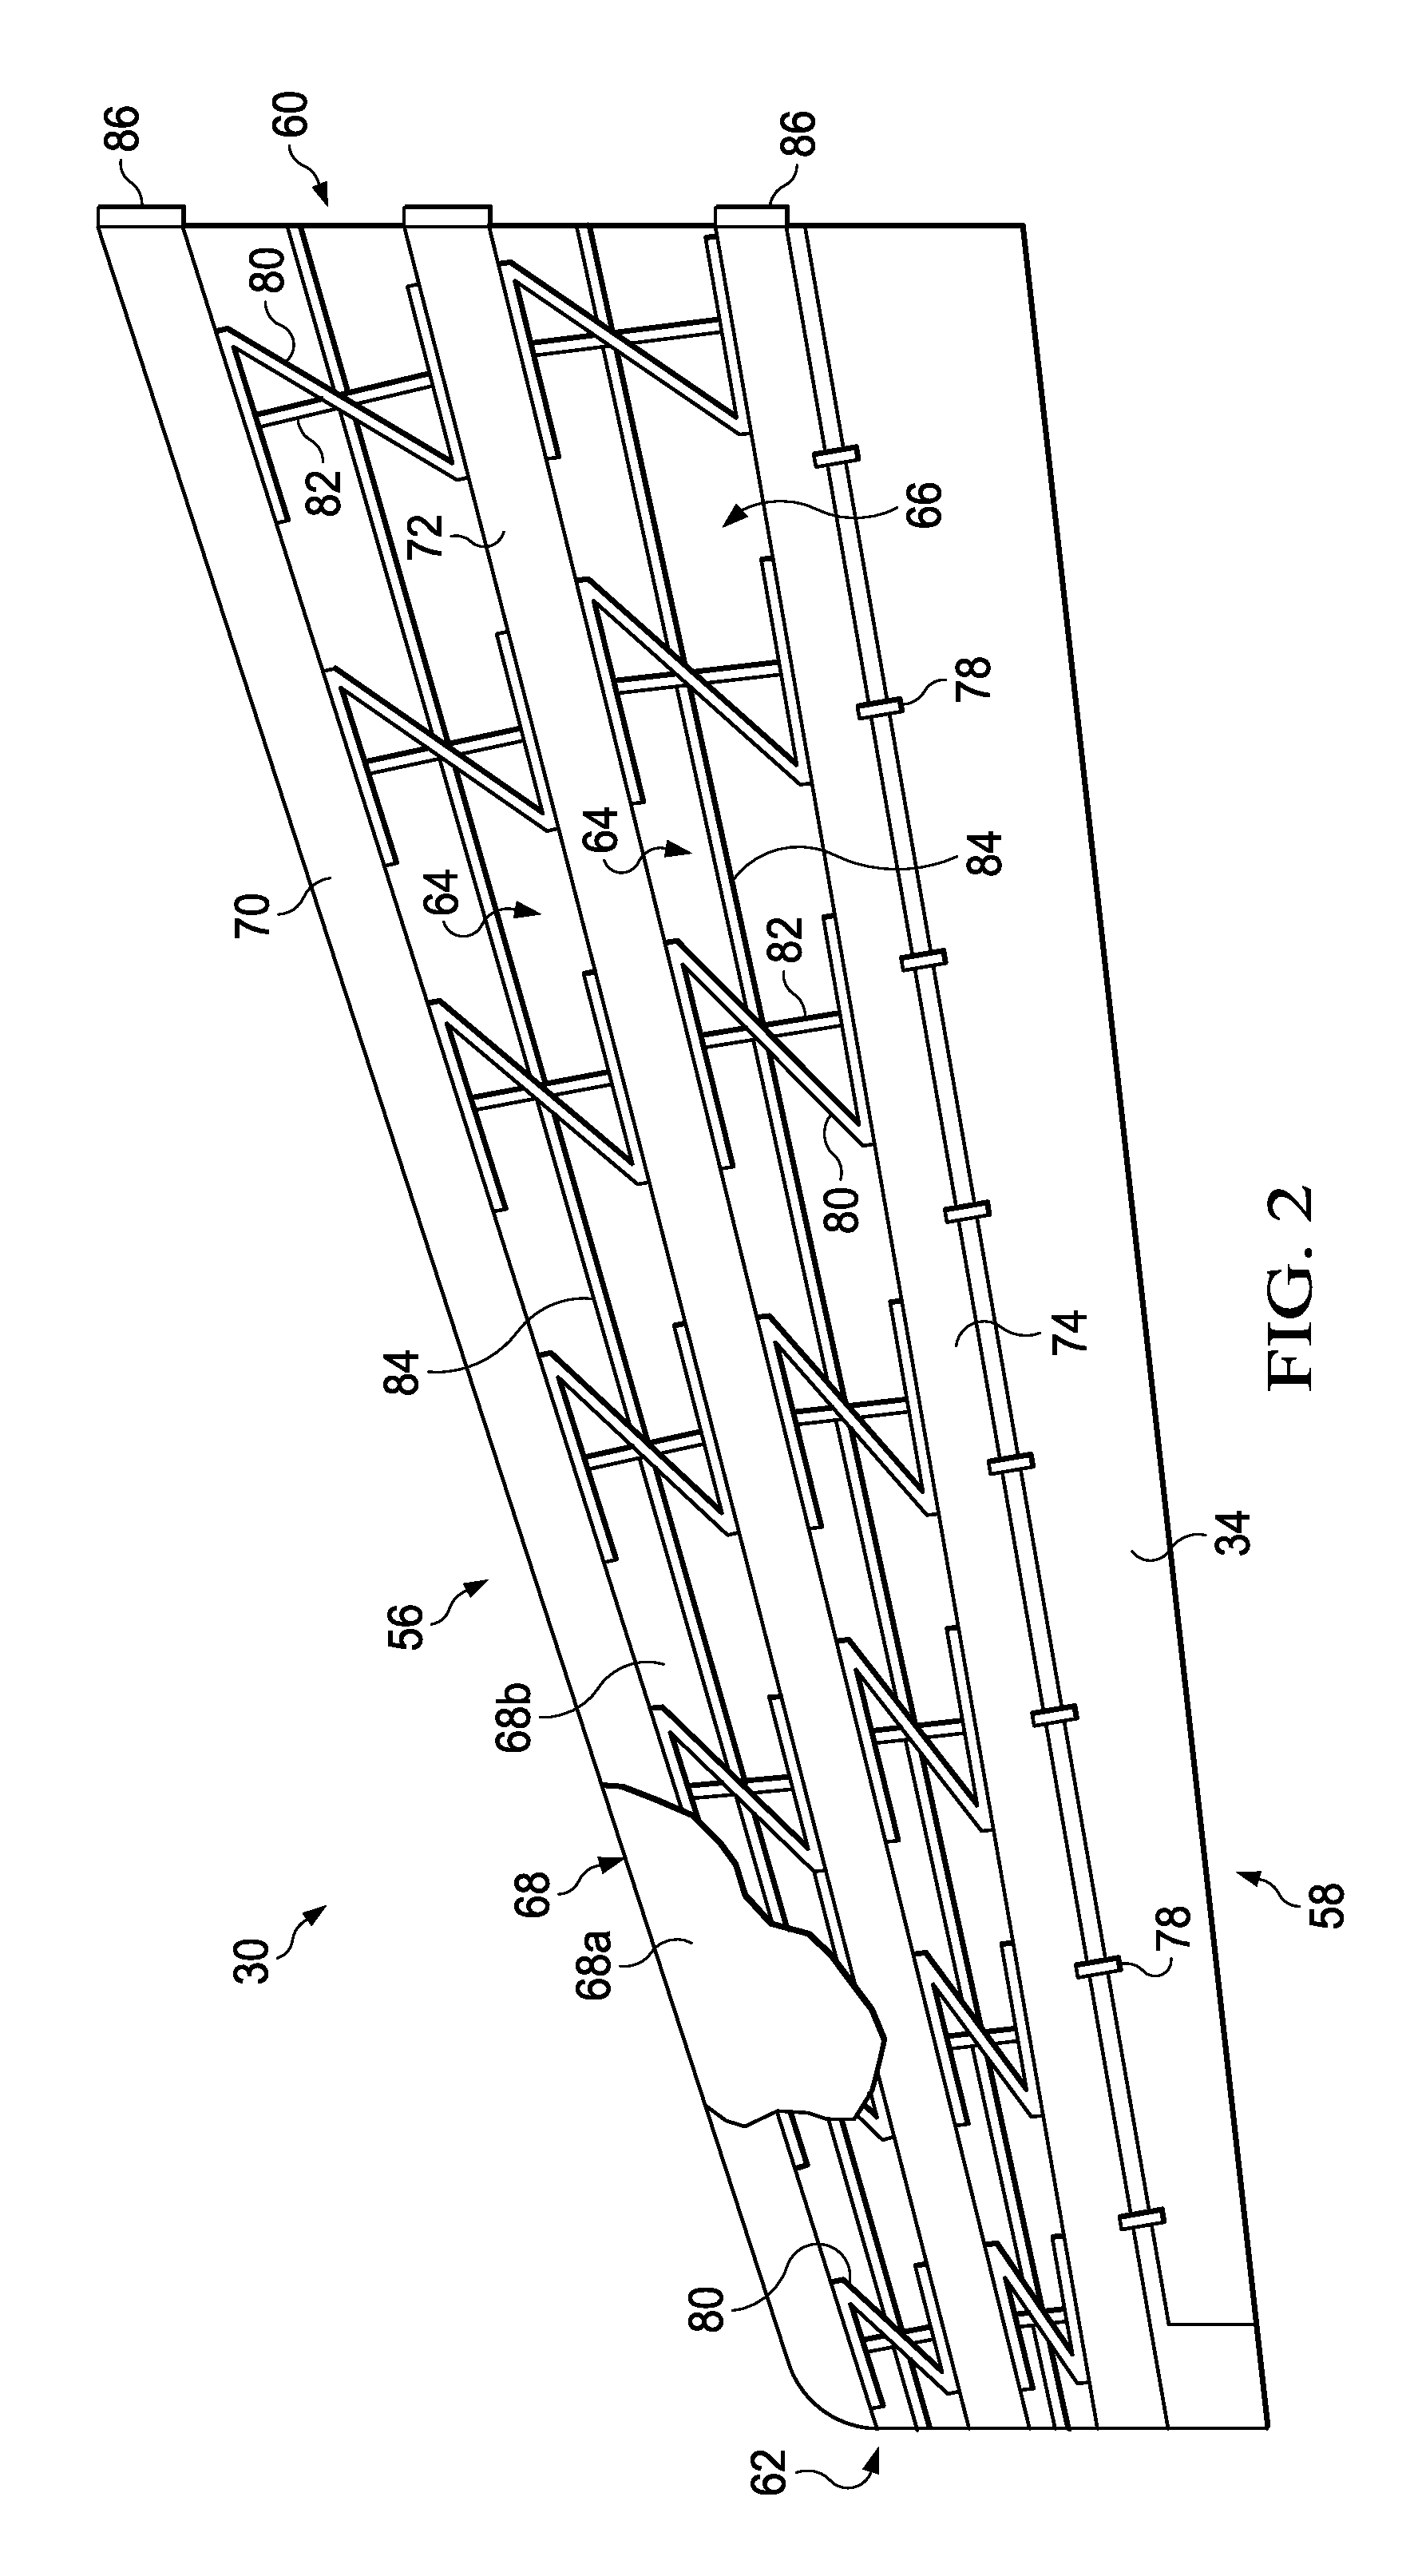 Bonded and Tailorable Composite Assembly